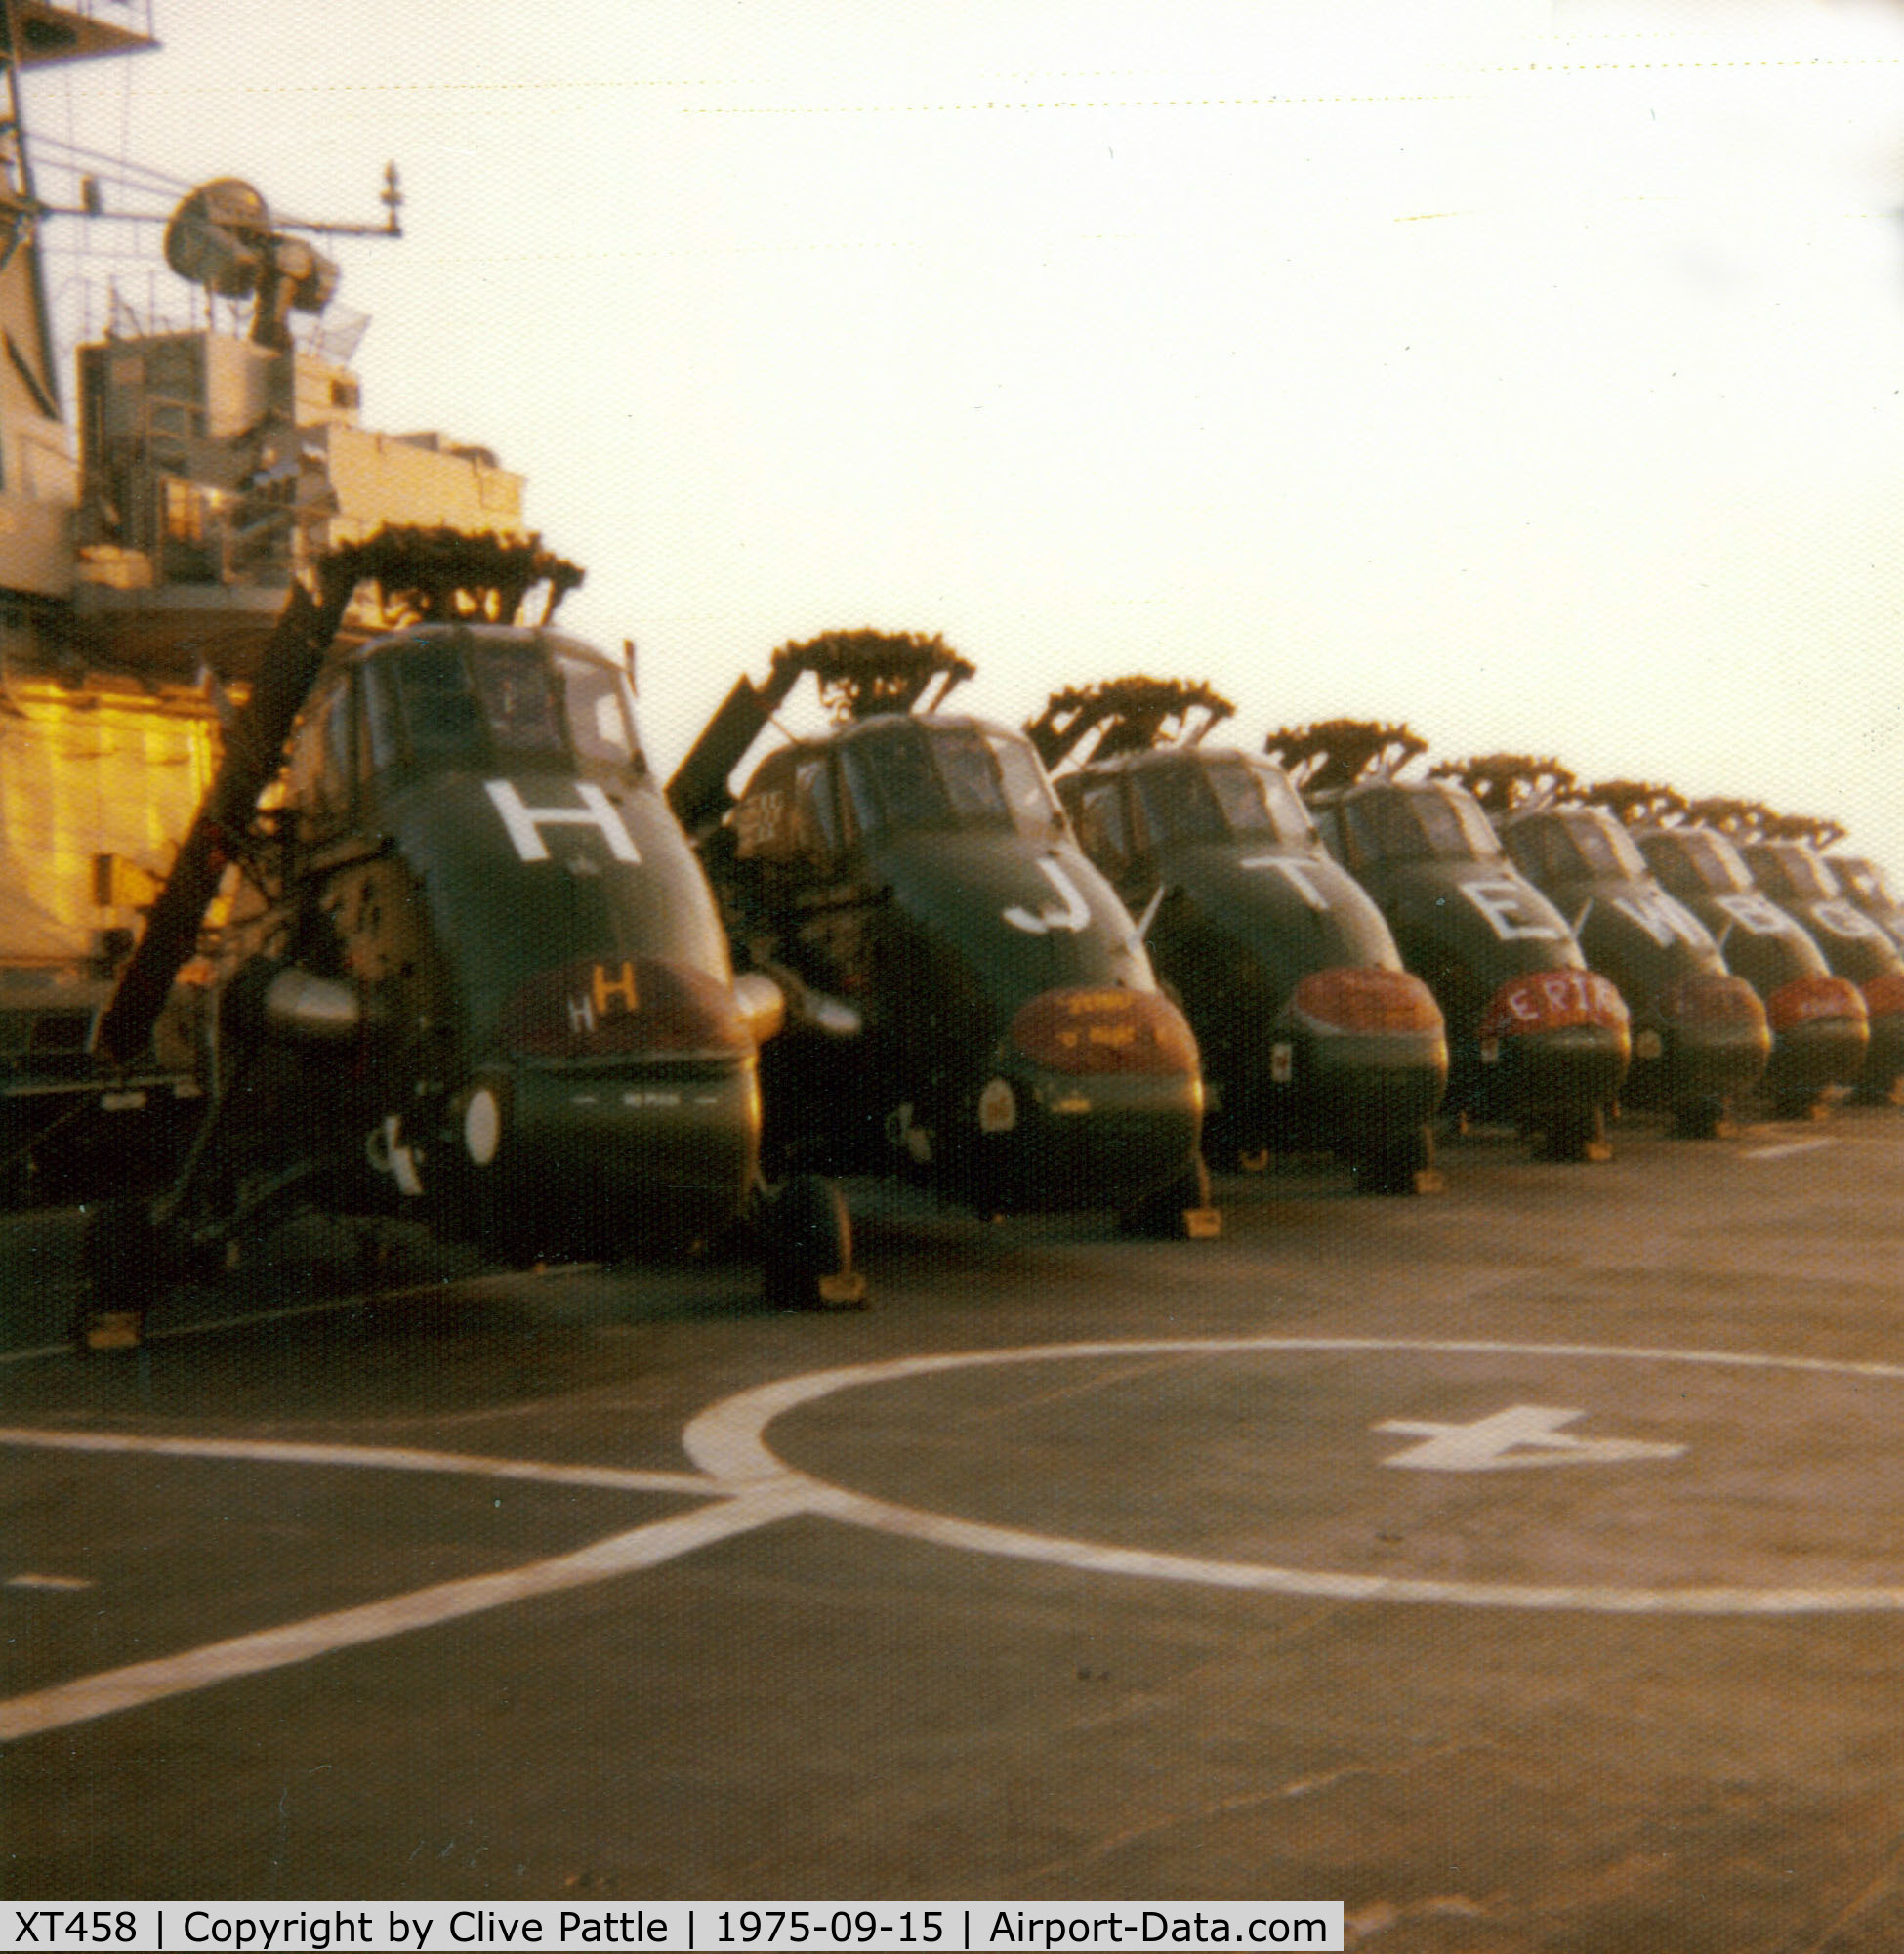 XT458, 1965 Westland Wessex HU.5 C/N WA280, A line-up of 845 NAS Westland Wessex on HMS Hermes, pictured in September 1975 during Exercise Deep Express '75. Picture taken on an instamatic camera hence poor quality, but submitted for sharing/historical purposes